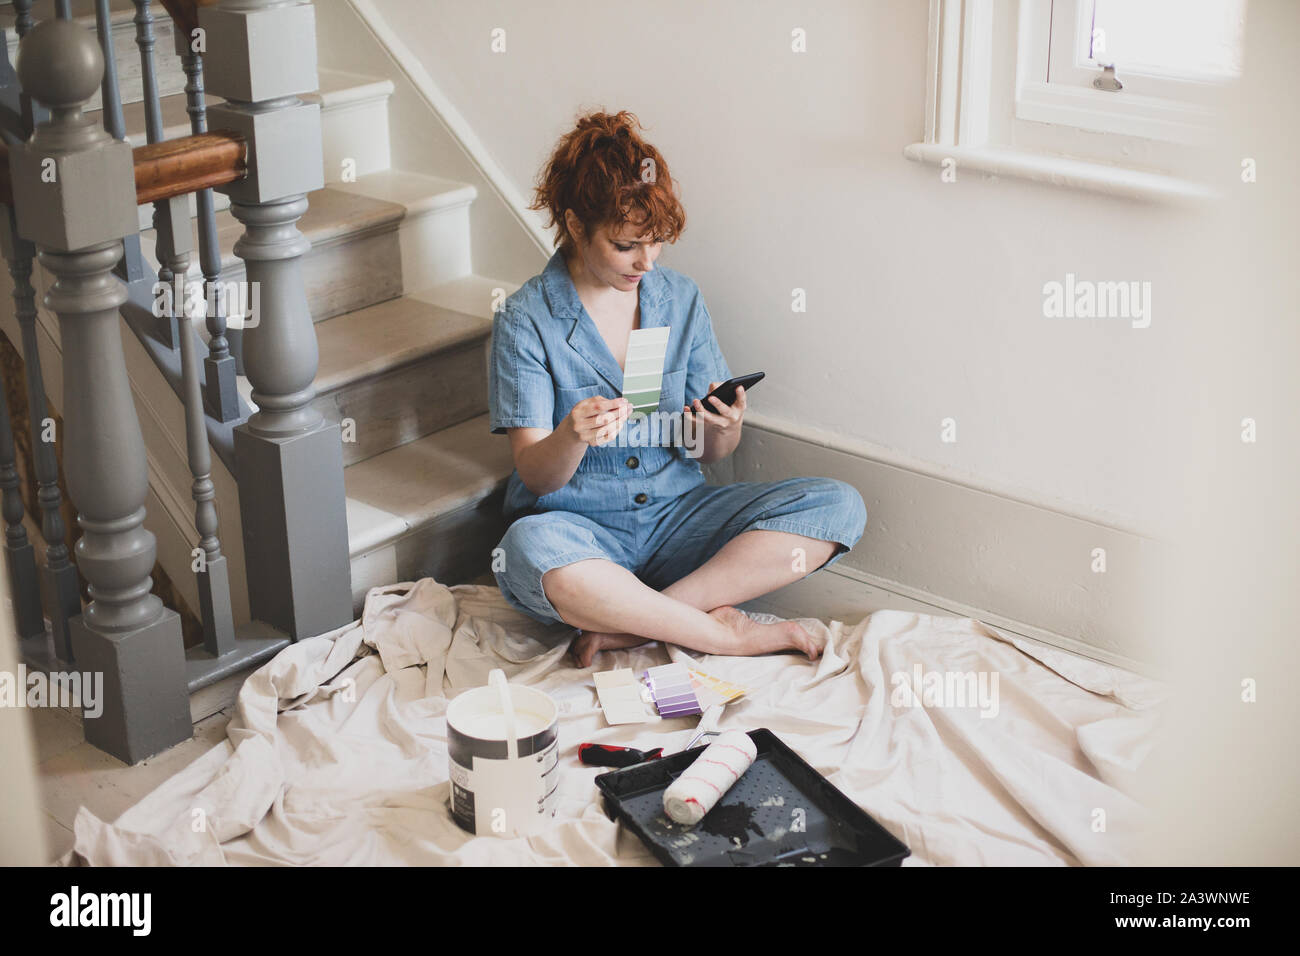 Female ordering paint on smartphone to decorate Stock Photo